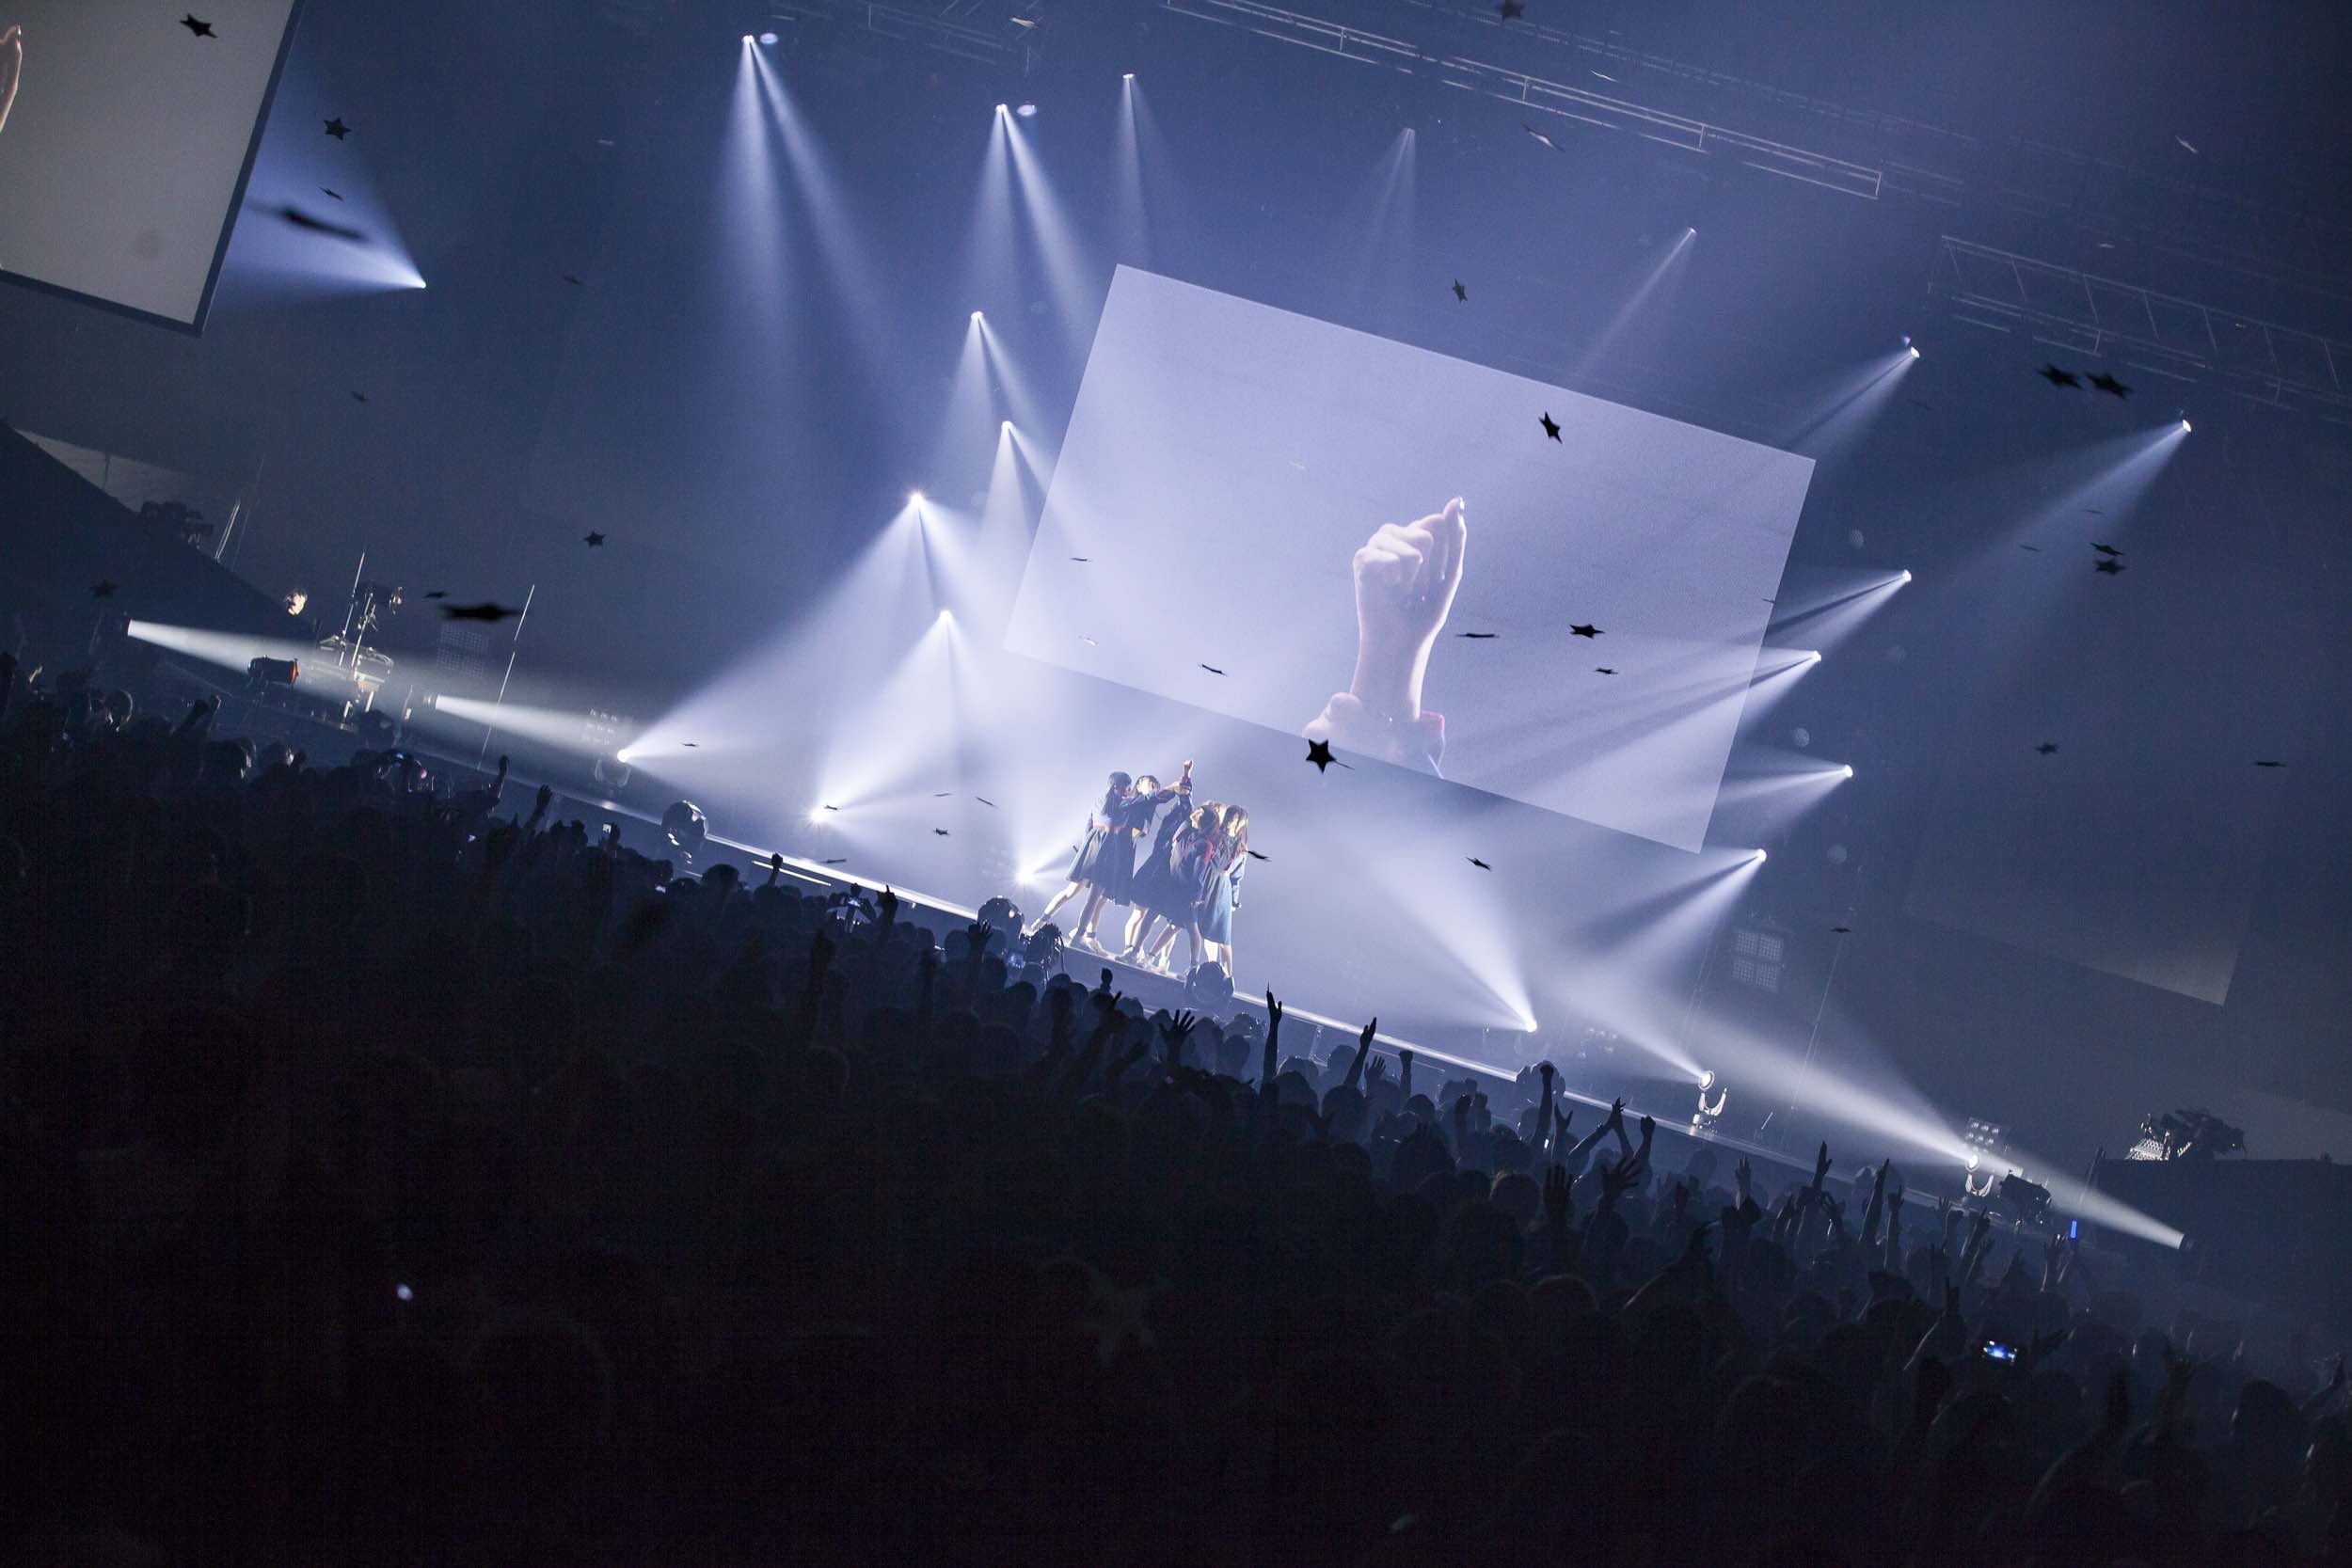 BiSH Release Preview of “Promise The Star” From Makuhari Messe Blu-ray/DVD!